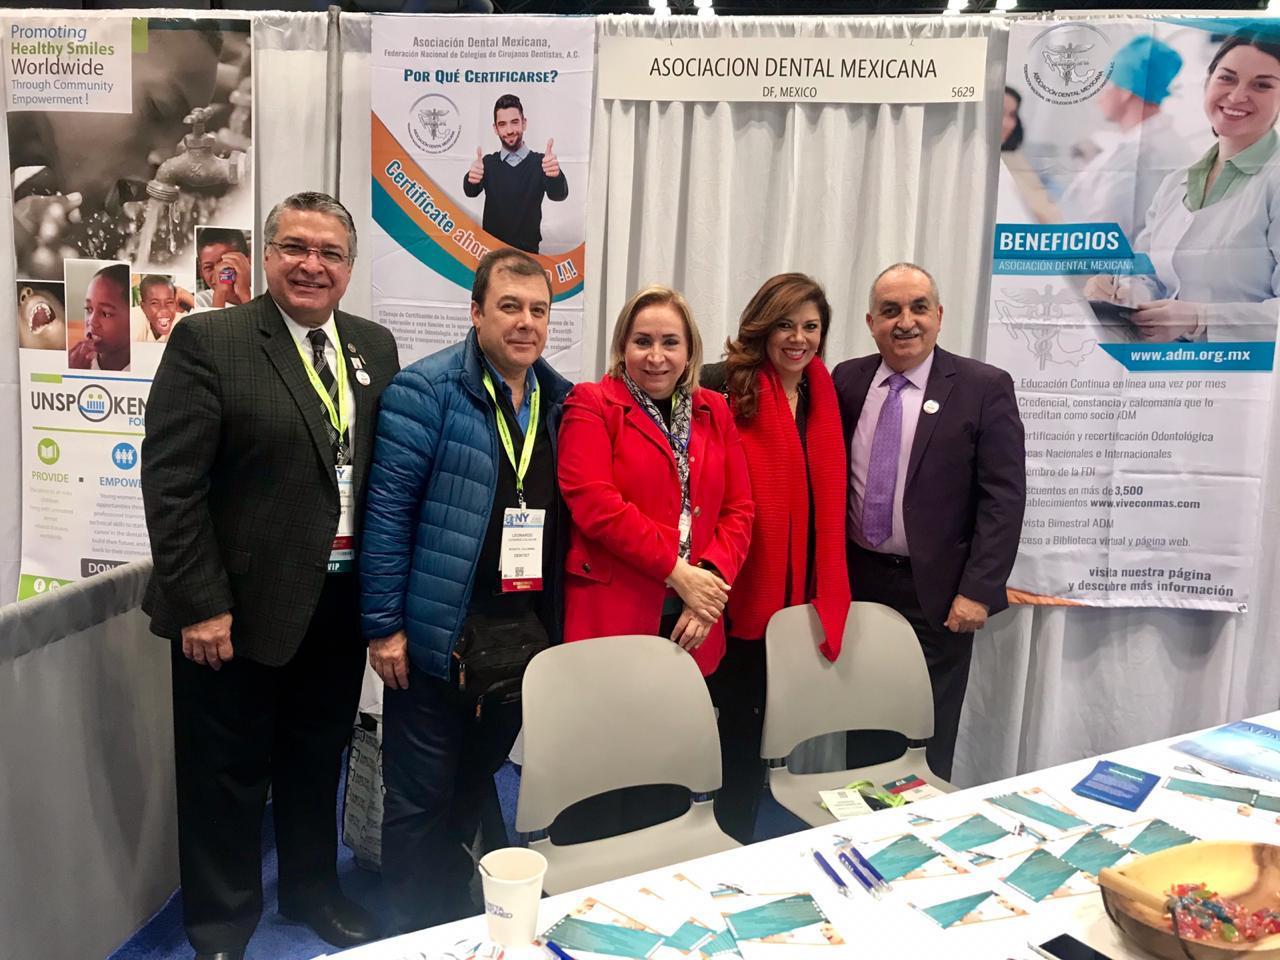 Stand Greater New York Dental Meeting 2018.